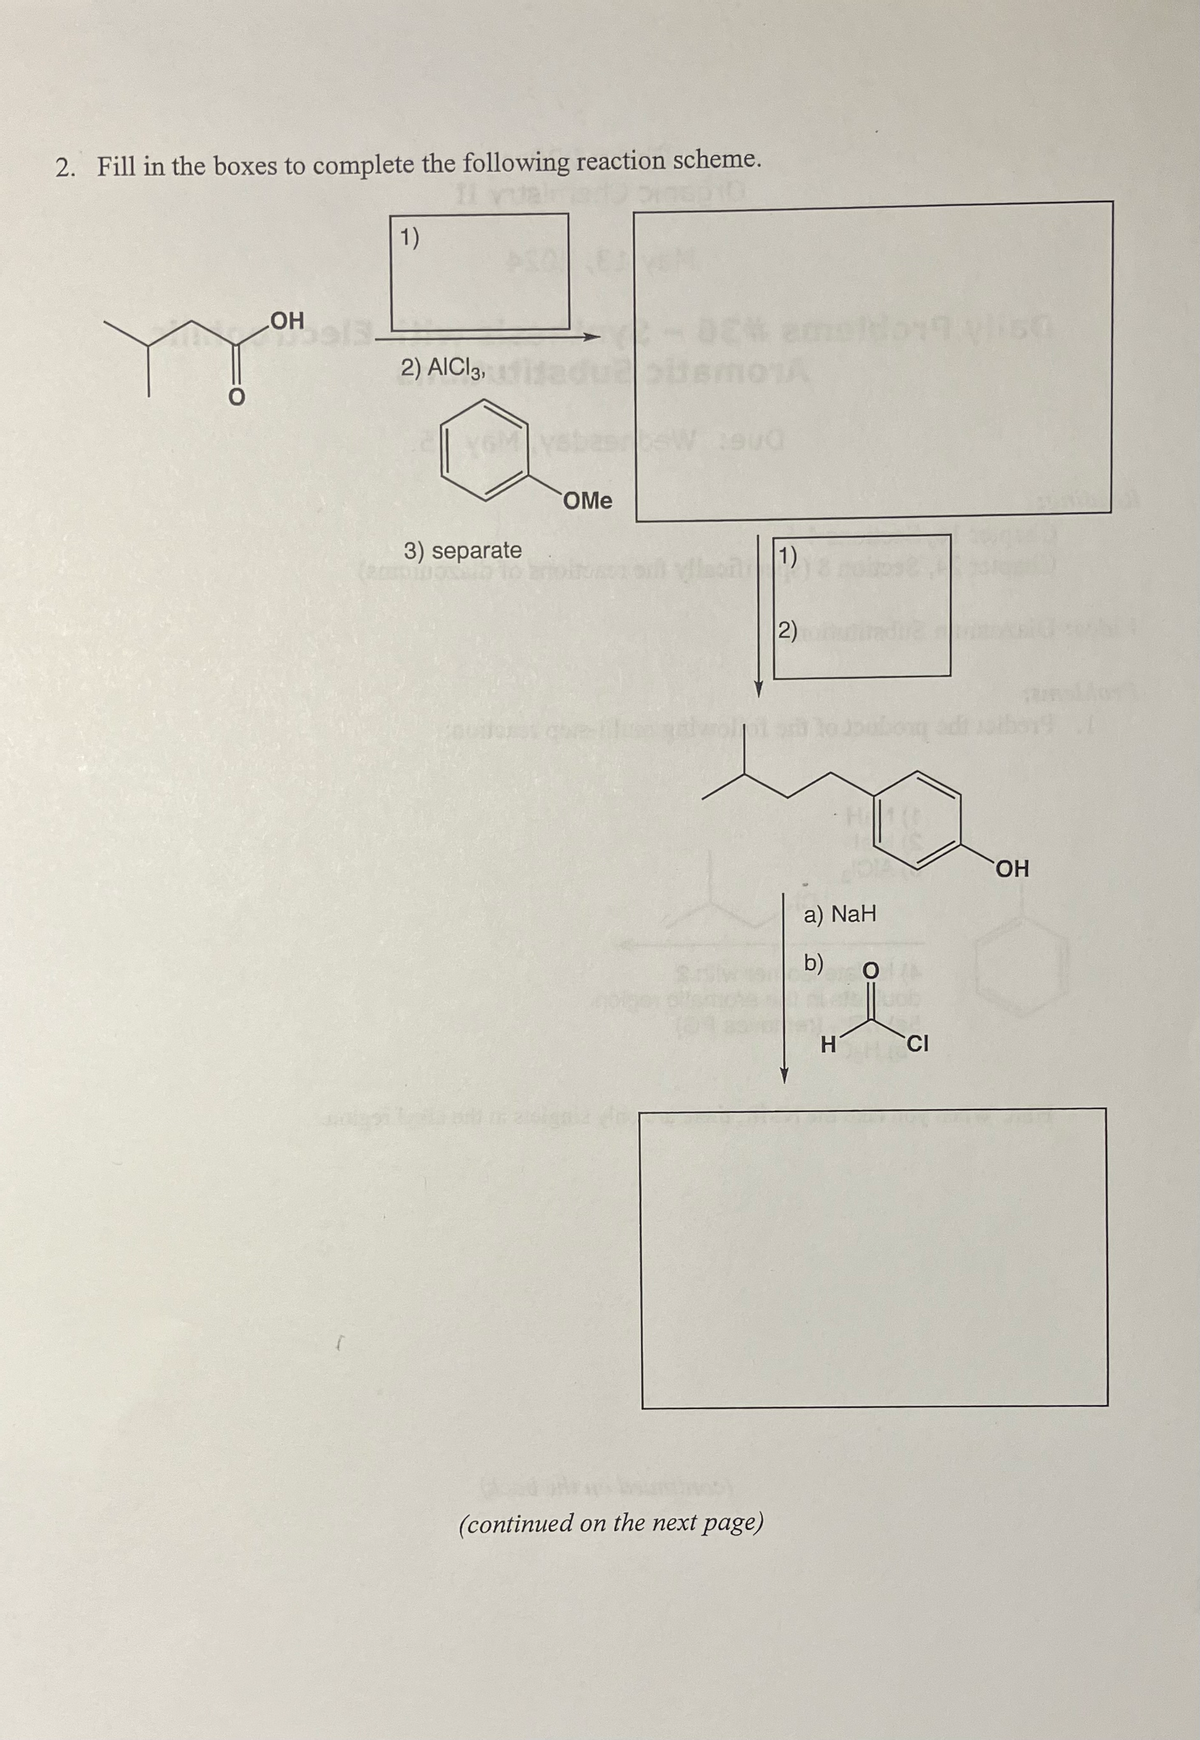 2. Fill in the boxes to complete the following reaction scheme.
1)
OH
2) AICI 3, ditadur
3) separate
OMe
(continued on the next page)
1)
2)
OH
a) NaH
b)
O
H
CI